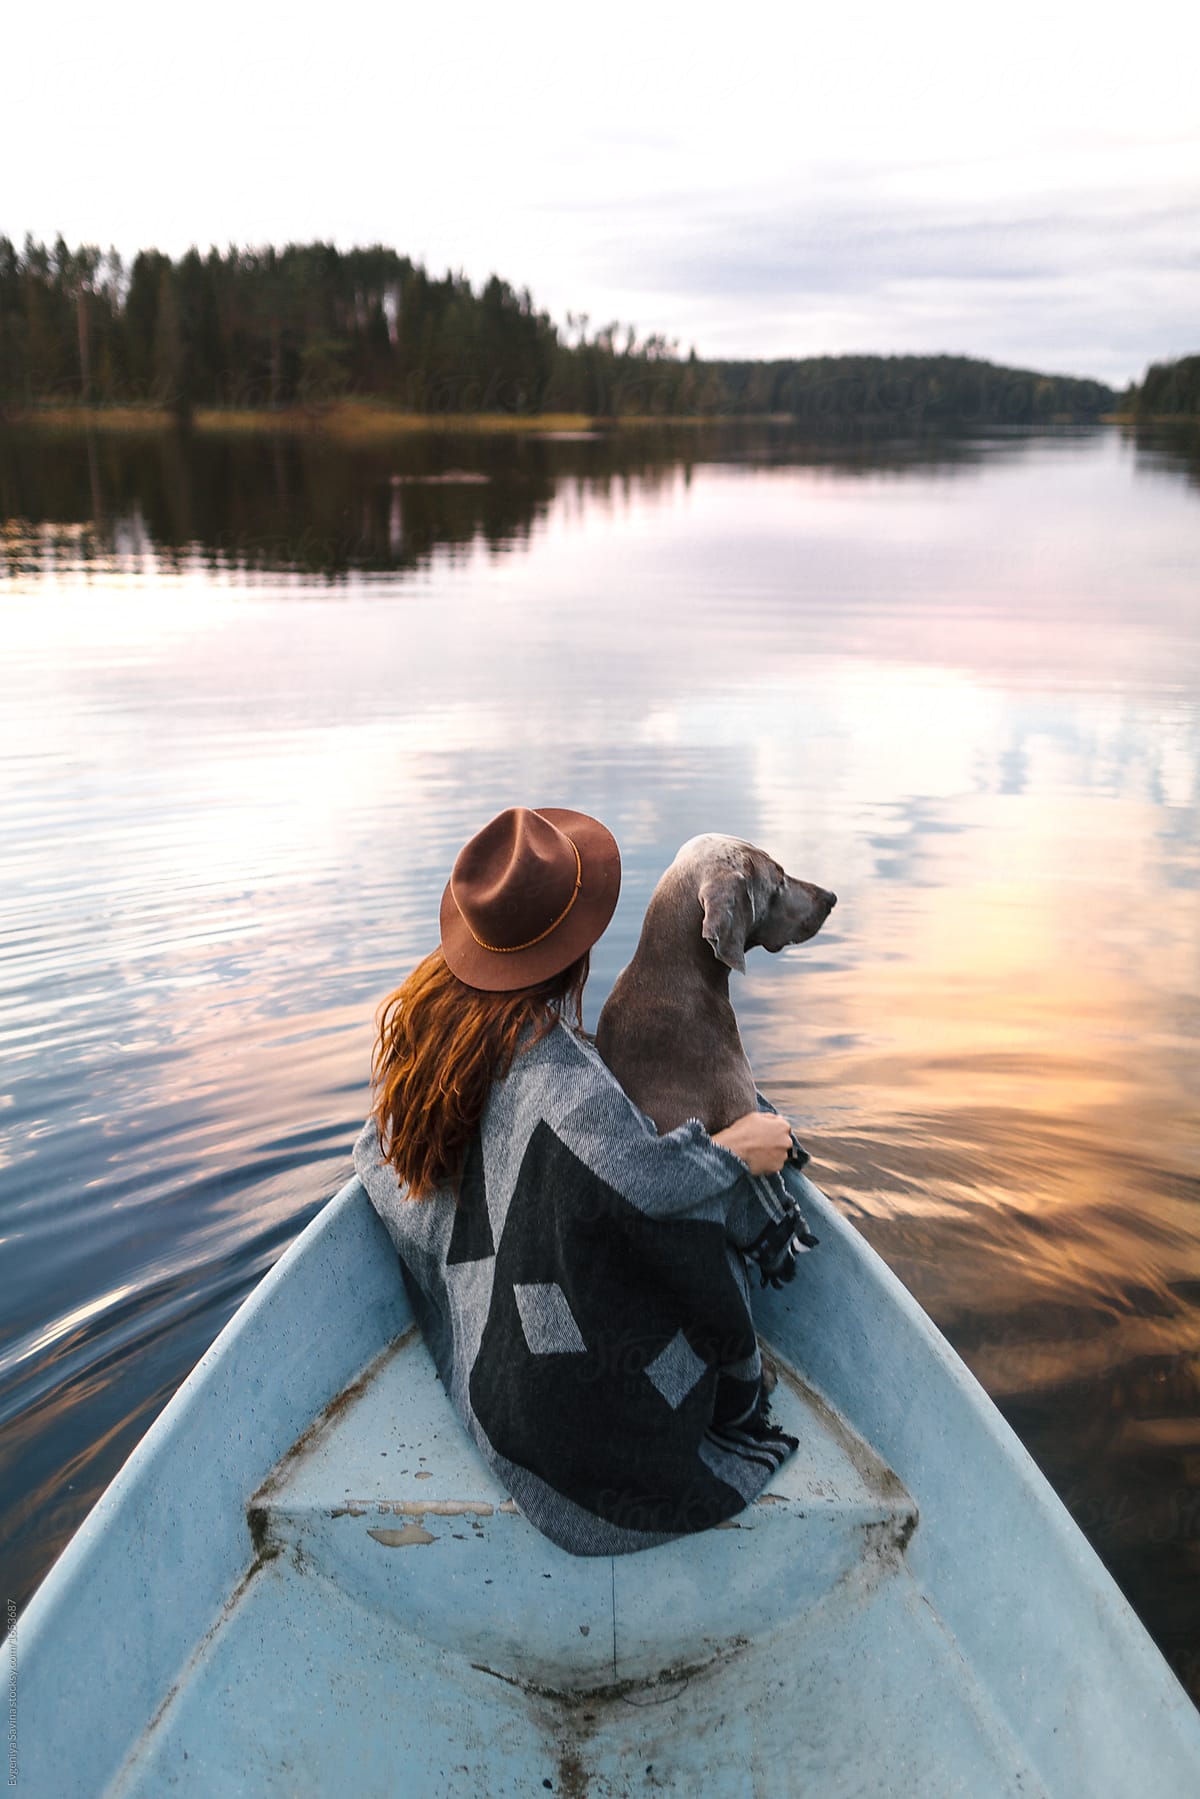 A dog and a girl in the boat